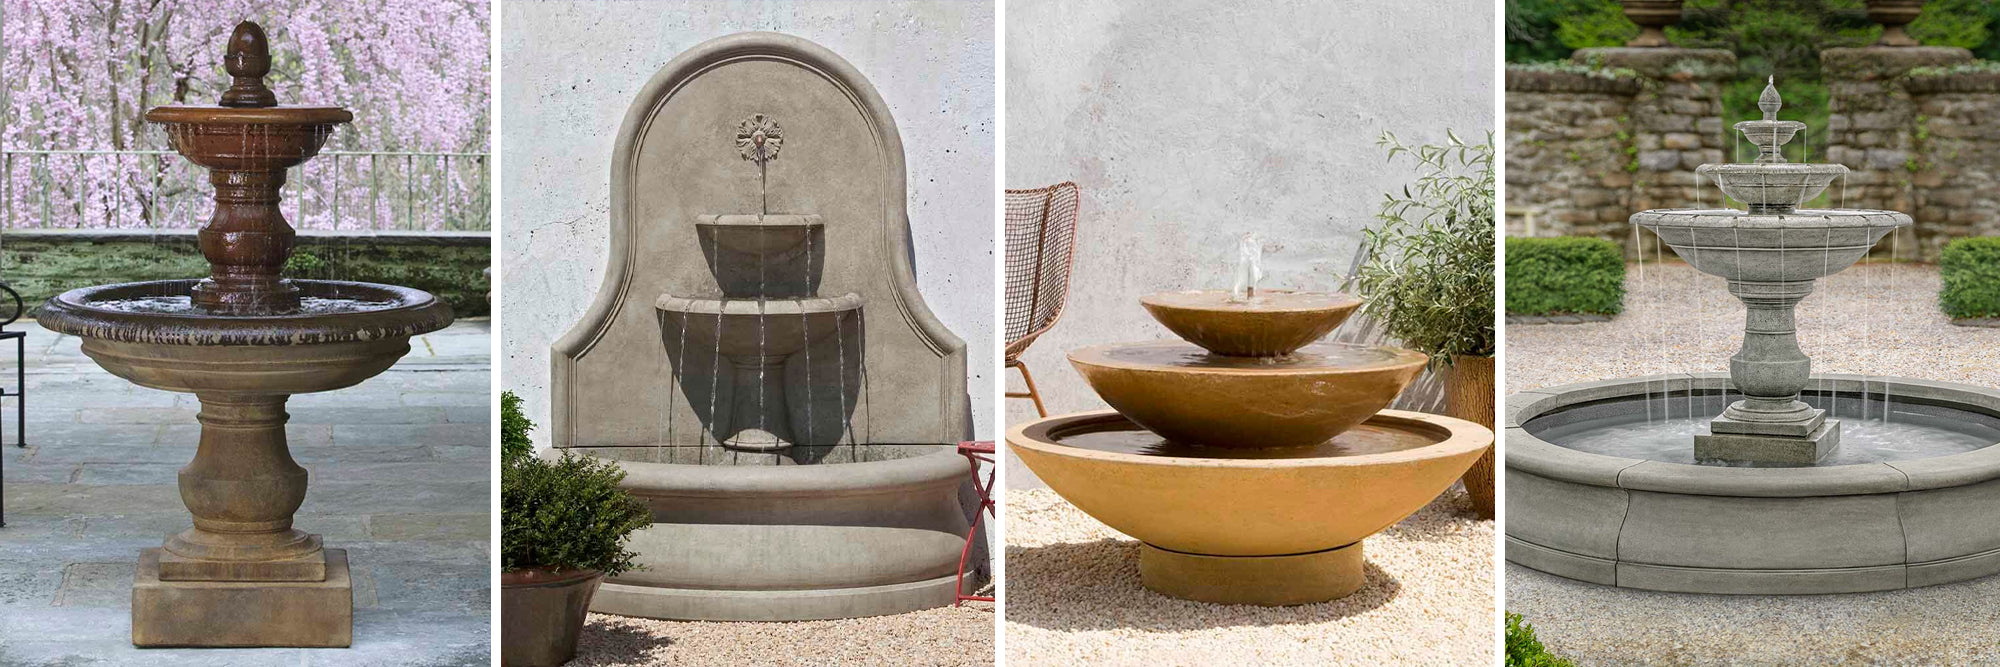 Outdoor Water Fountains by OutdoorFountainPros.com